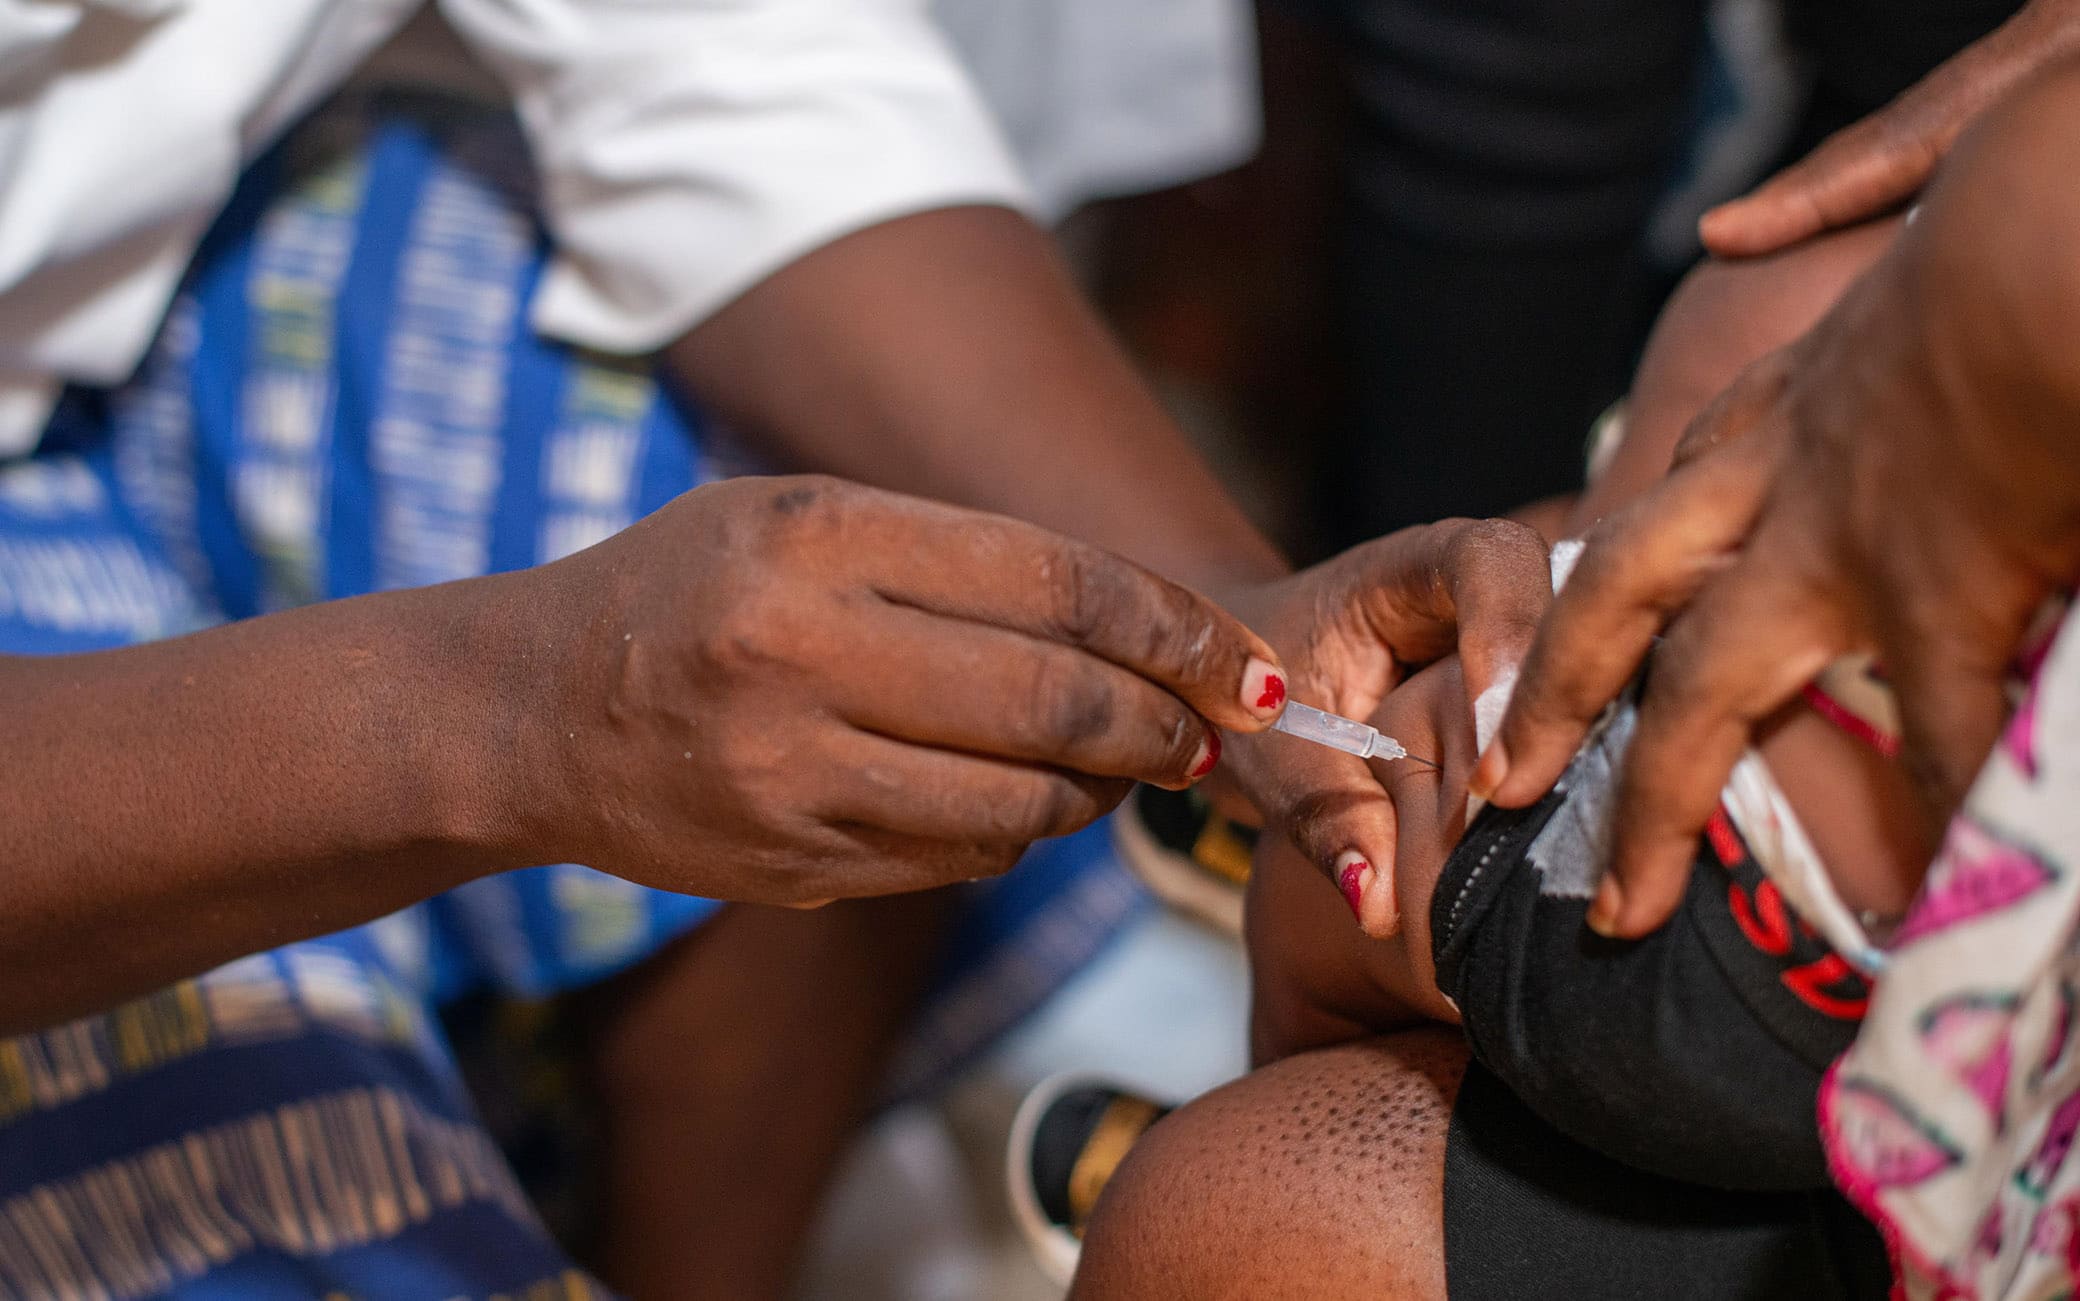 epa11096741 A nurse vaccinates a child against malaria in Nyalla Medical Centre in Douala, Cameroon, 22 January 2024. A new malaria vaccine, known as RTS,S, or Mosquirix, made by GlaxoSmithKline, is being rolled out for the first time as an immunization campaign for children in Cameroon. According to the World Health Organisation, the WHO African Region, with an estimated 233 million cases in 2022, accounted for about 94% of cases globally. Malaria is highly endemic in Cameroon and the WHO estimates that about 11,000 people die from malaria in Cameroon every year. EPA/DONGMO RODRIGUE WILLIAM